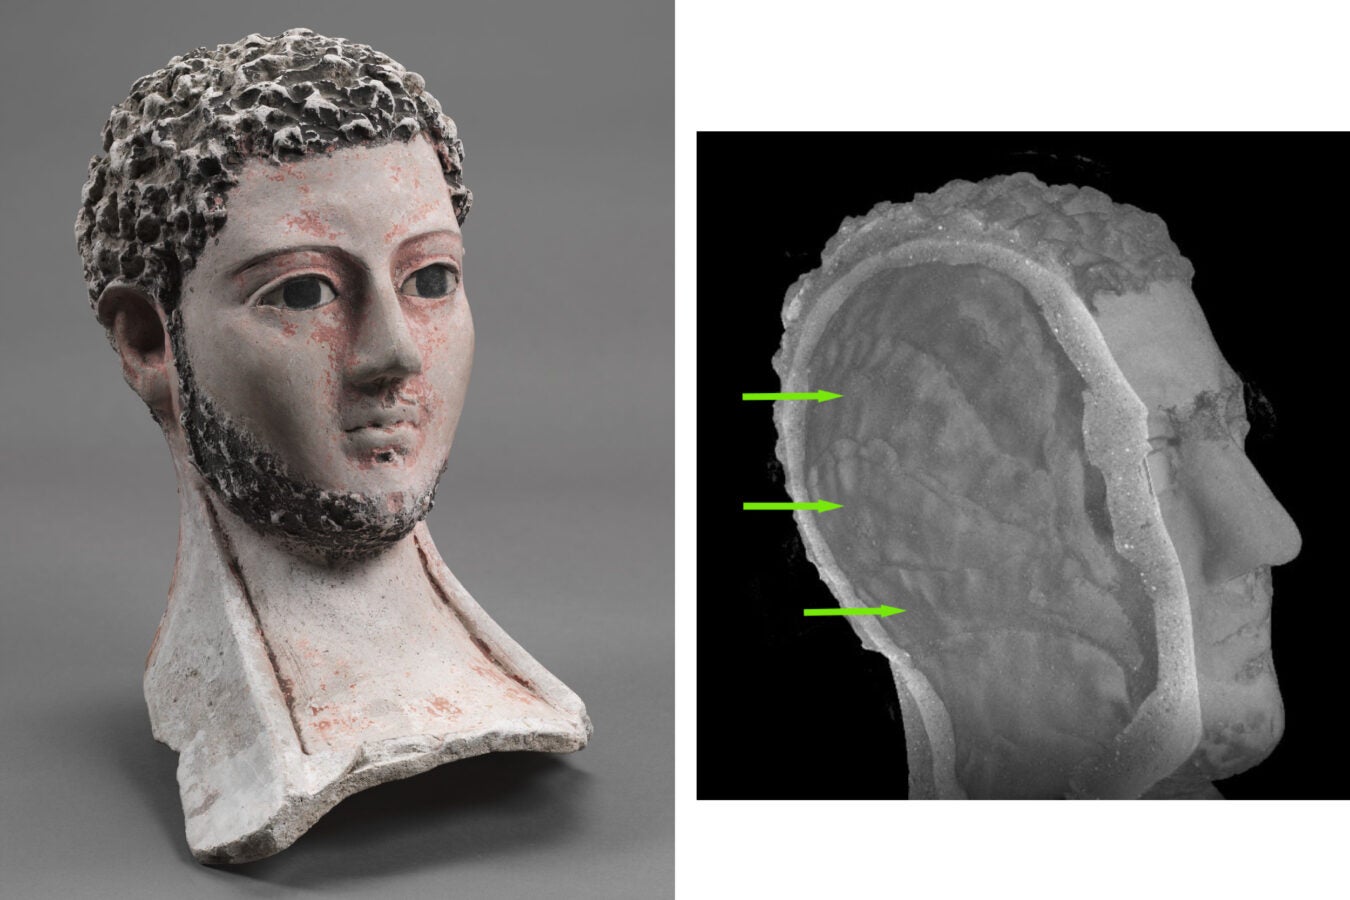 Plaster mask of man's head with remains of paint and glass inlays, alongside a micro-computed tomography 3D model of the mask showing indented plaster.